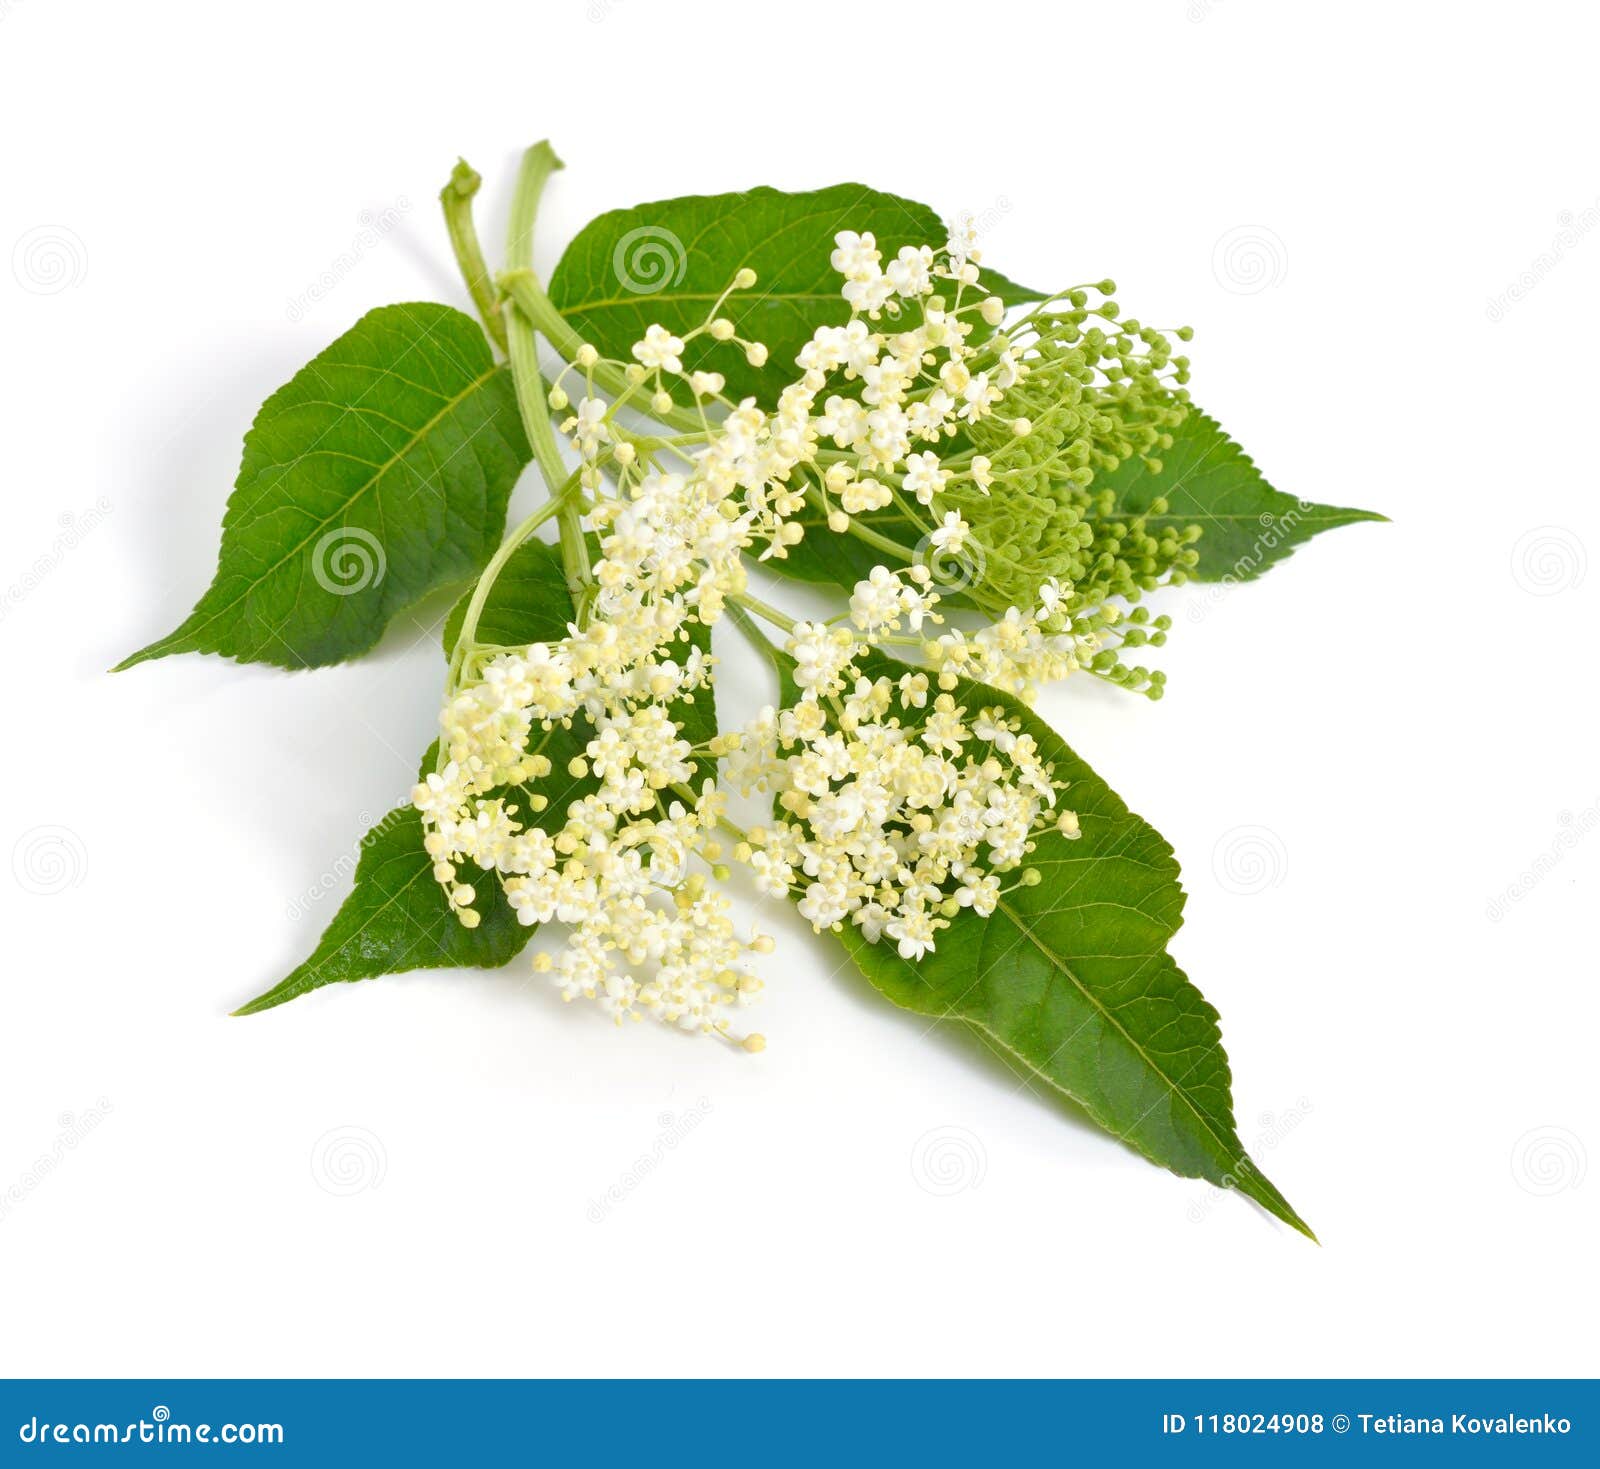 Elderberry Flower and Leaves Isolated on White Backgroun Stock Photo ...